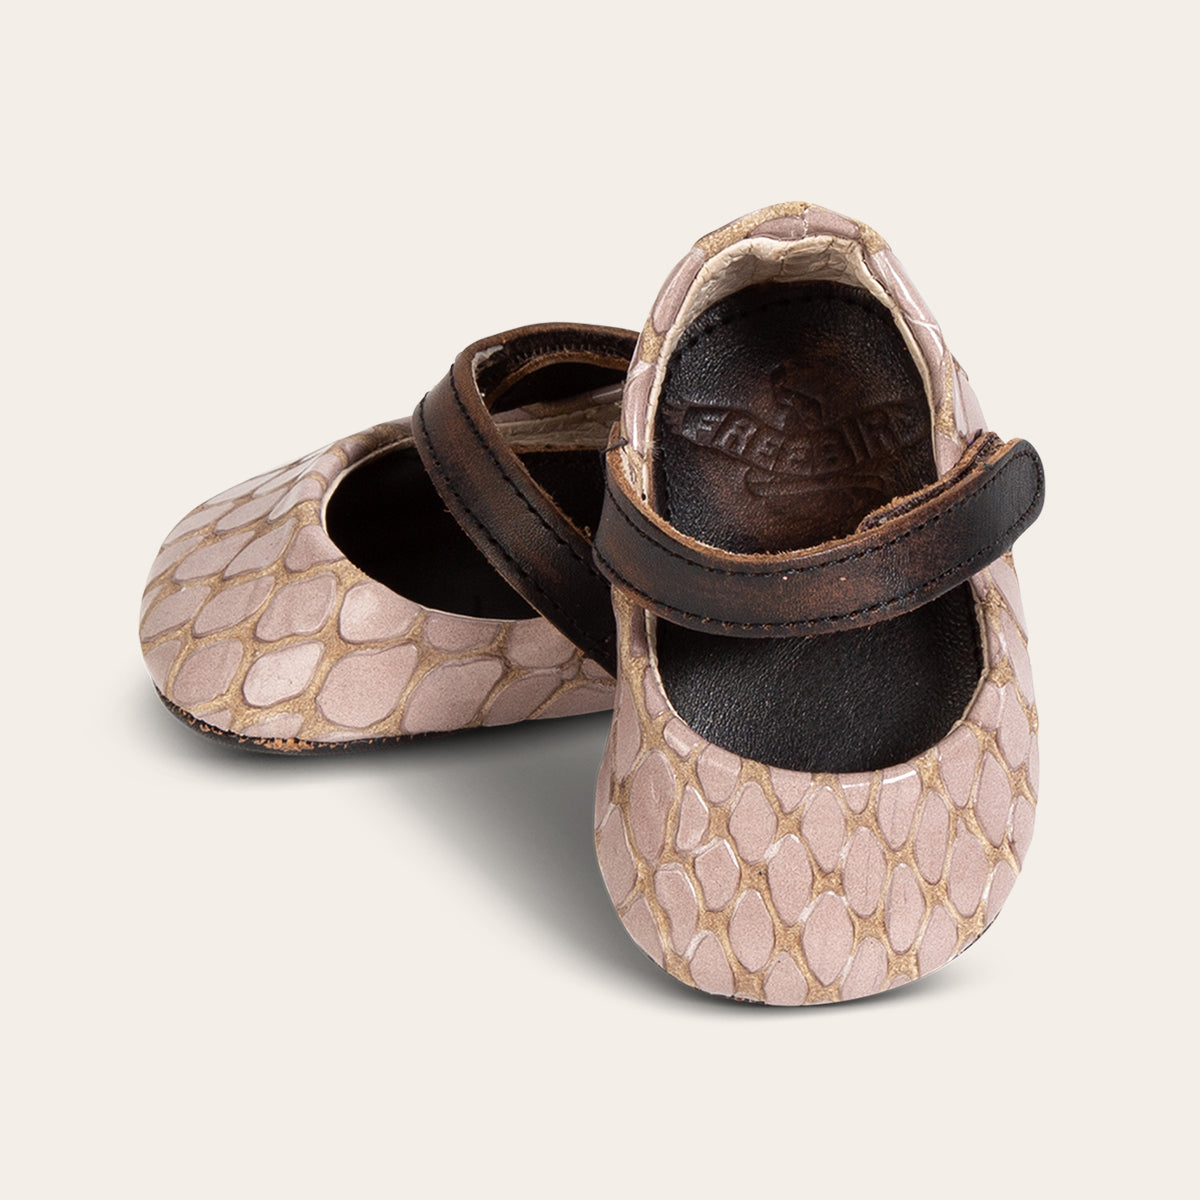 front view showing top leather strap on FREEBIRD infant baby Jane stone croco leather shoe